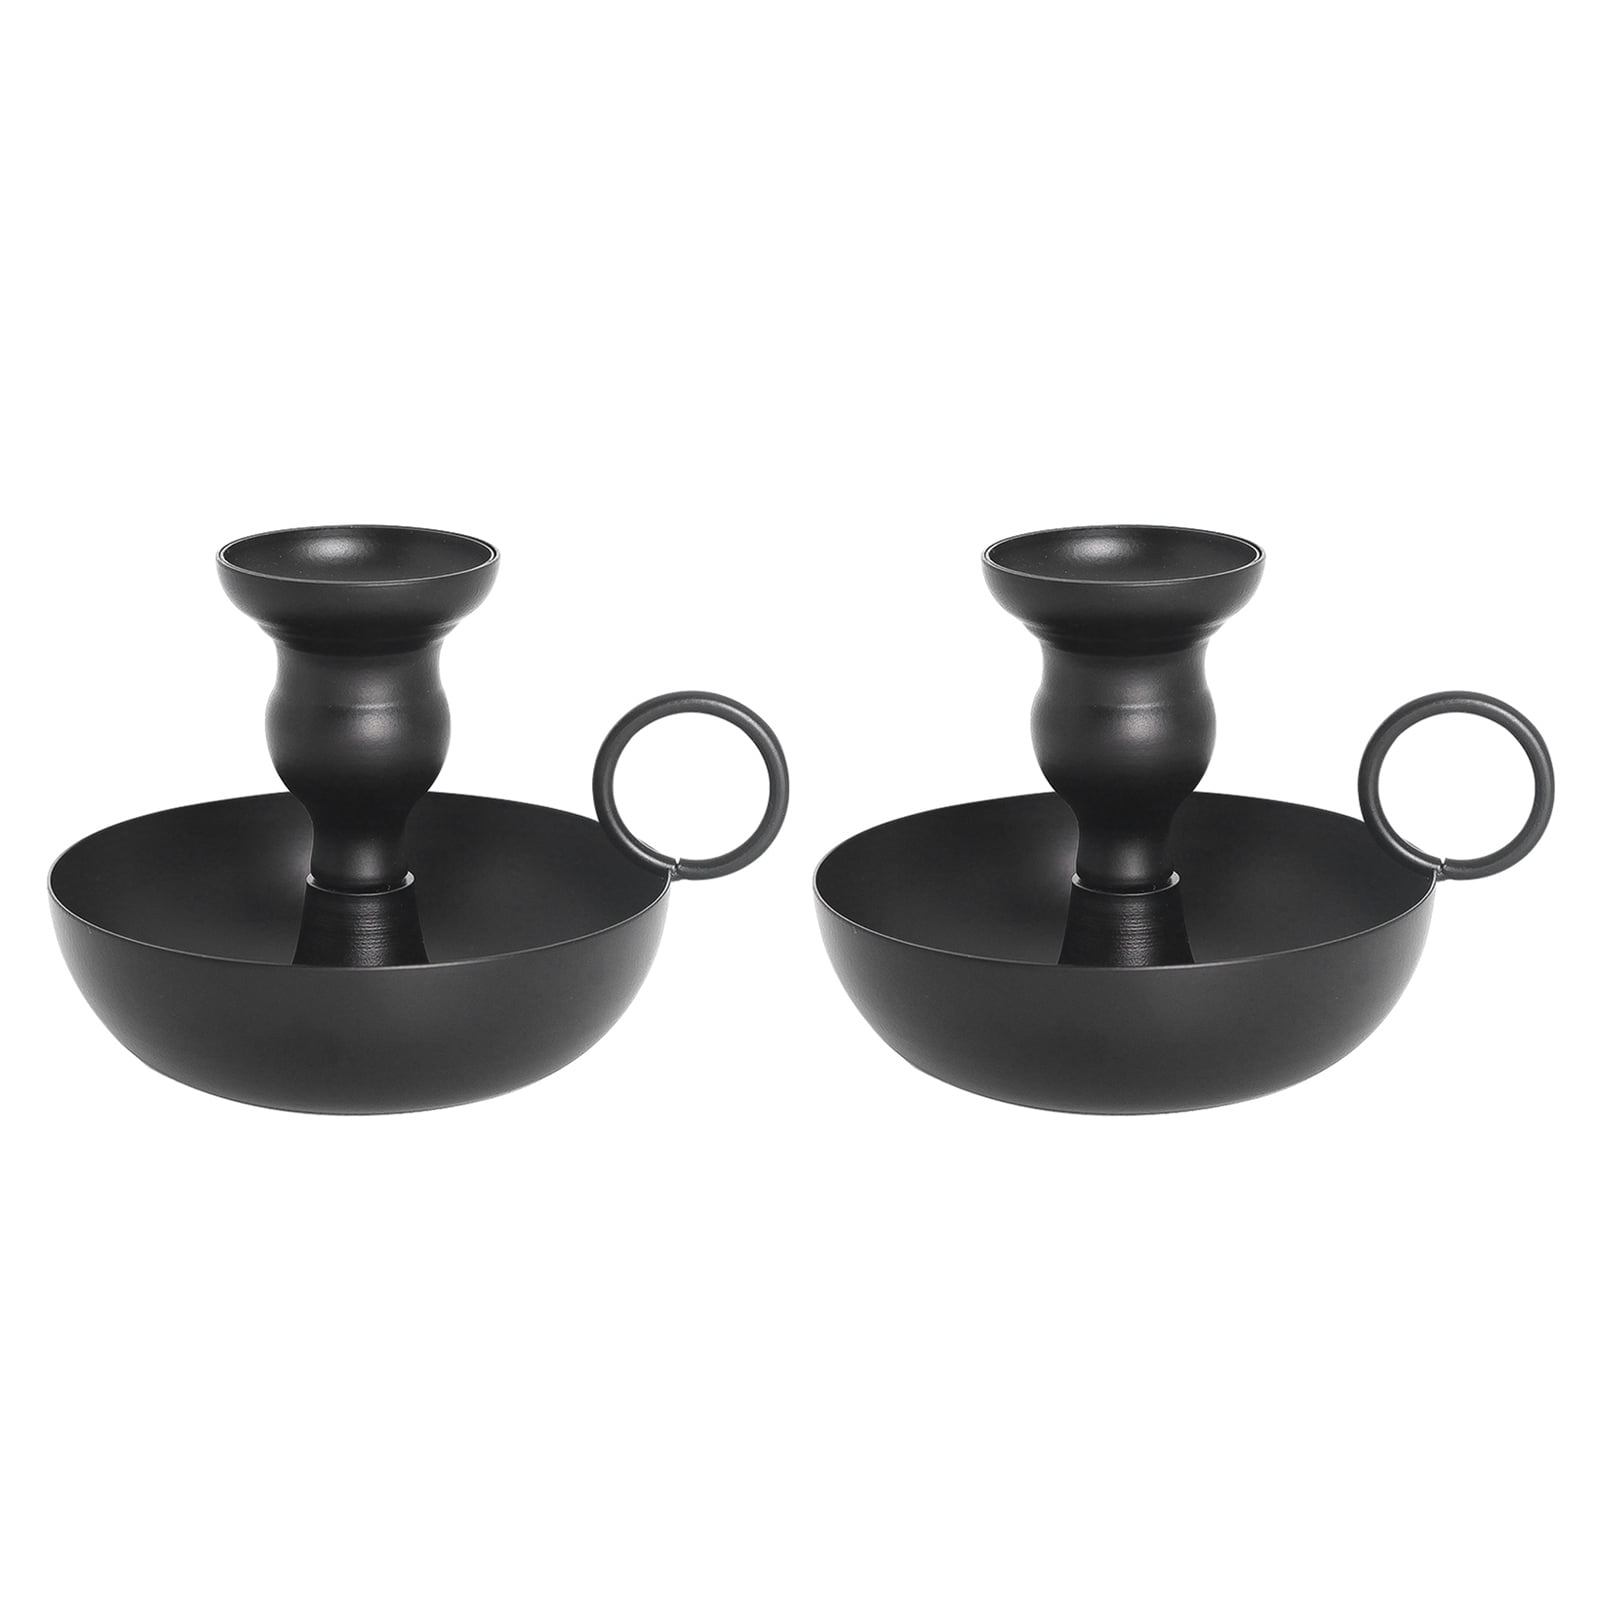 Details about   2pcs Candle Holders Candle Base Traditional Candlestick Wedding Home Decor  I